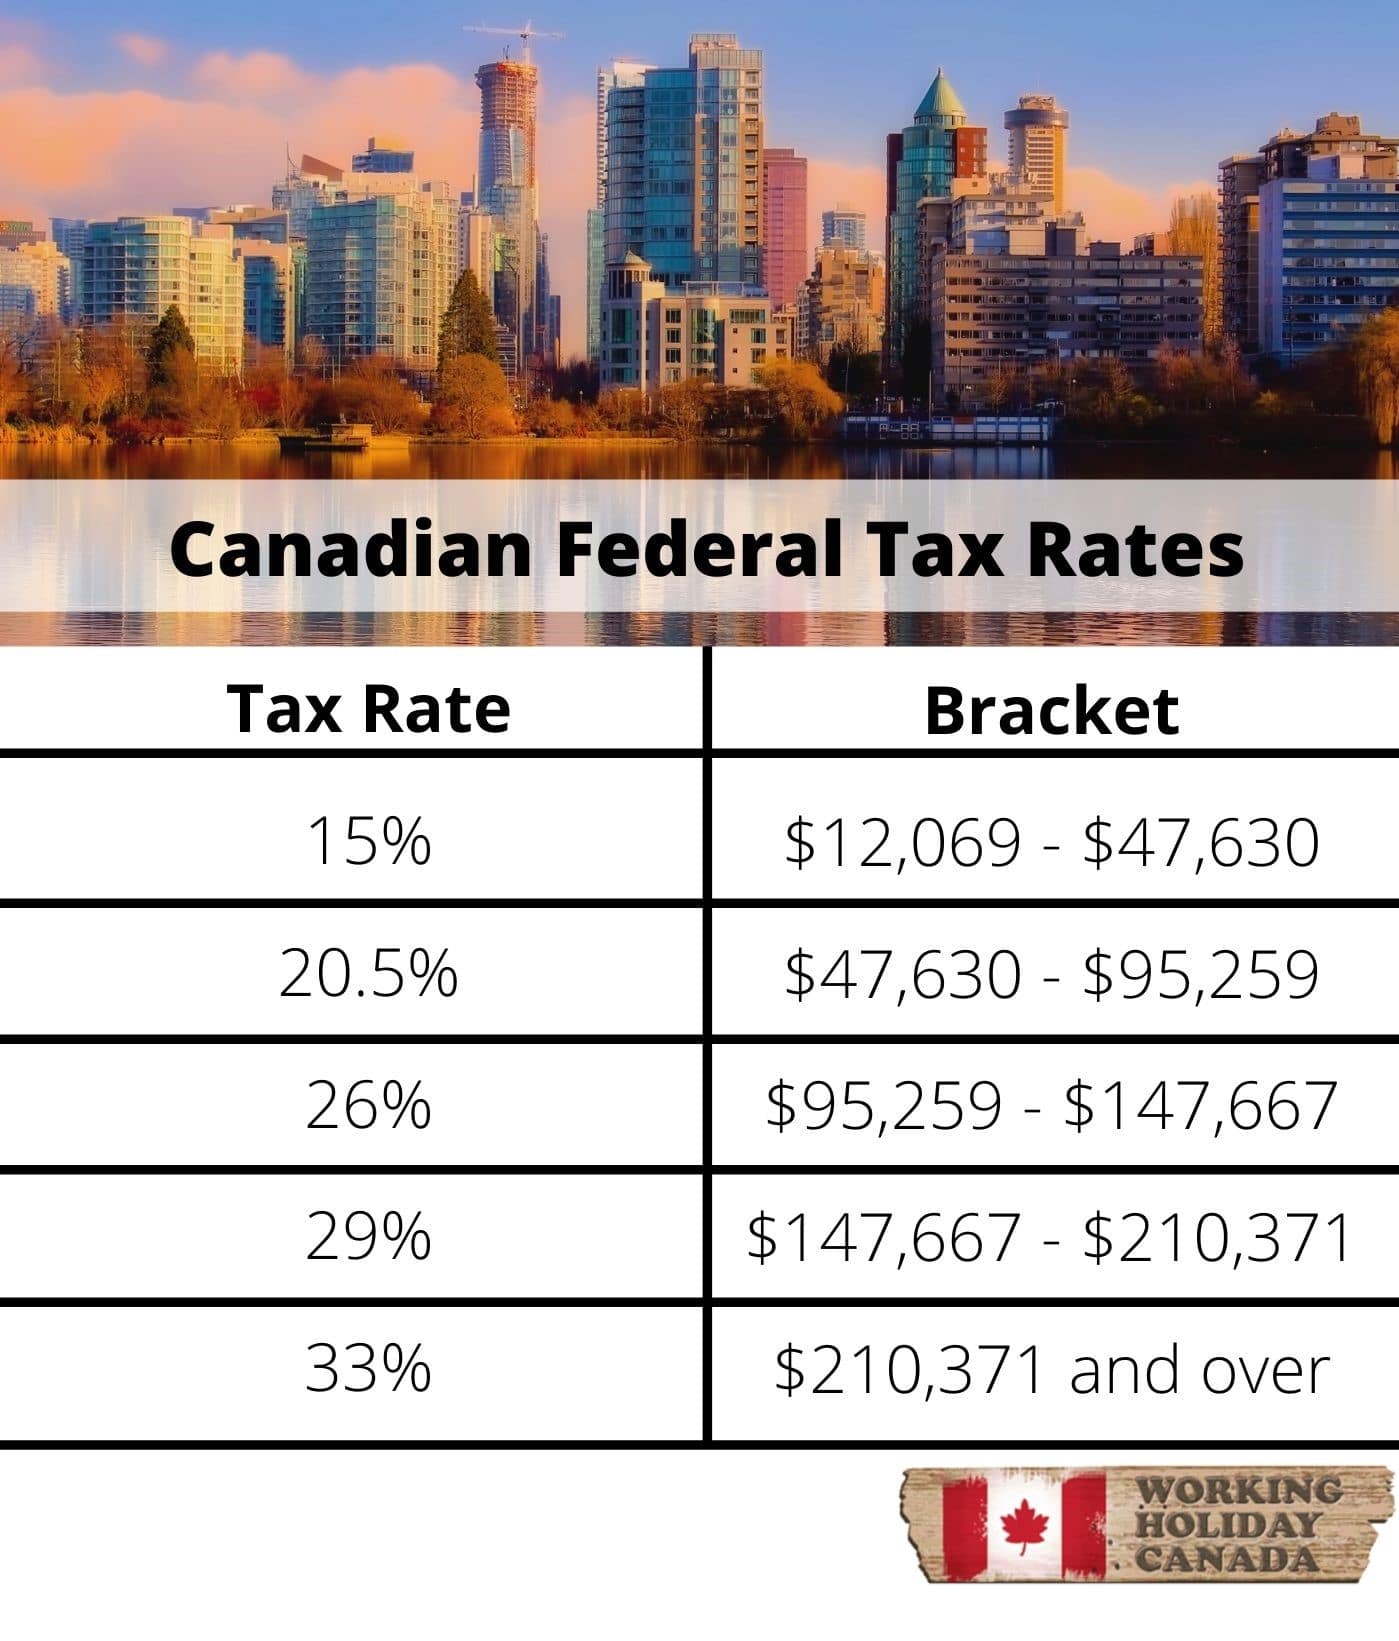 us tax rate 2022